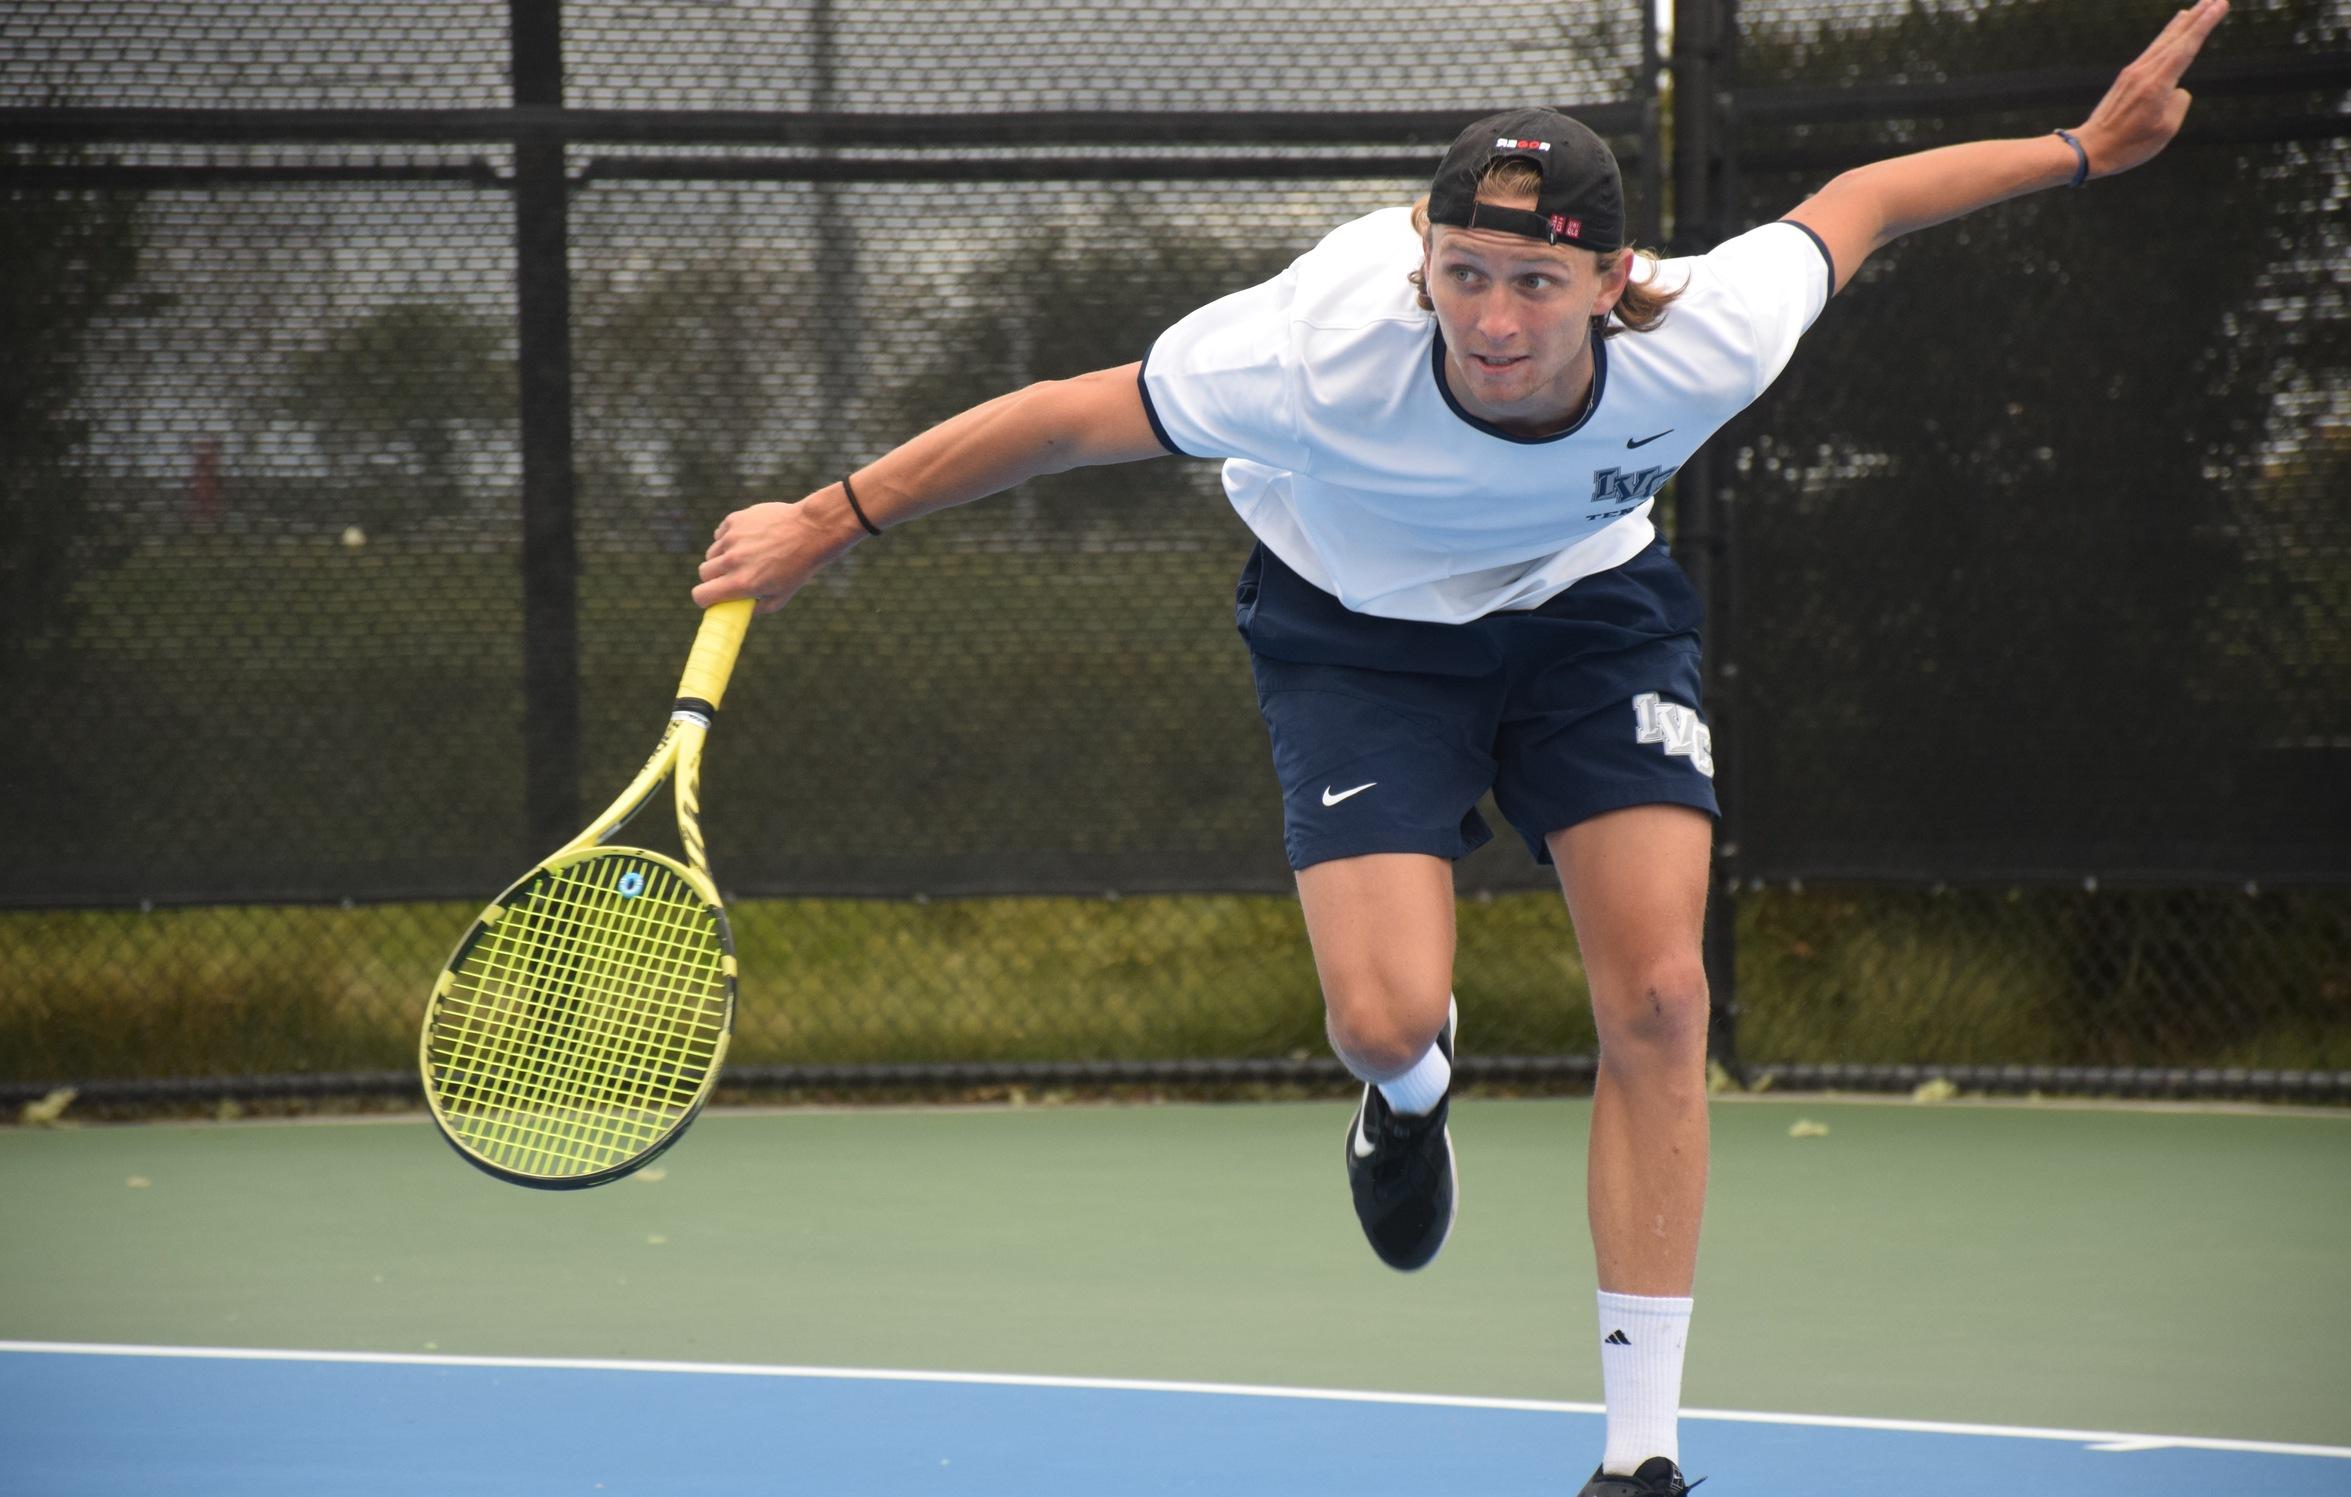 IVC's Arthur Bellegy named ITA sophomore player of the year